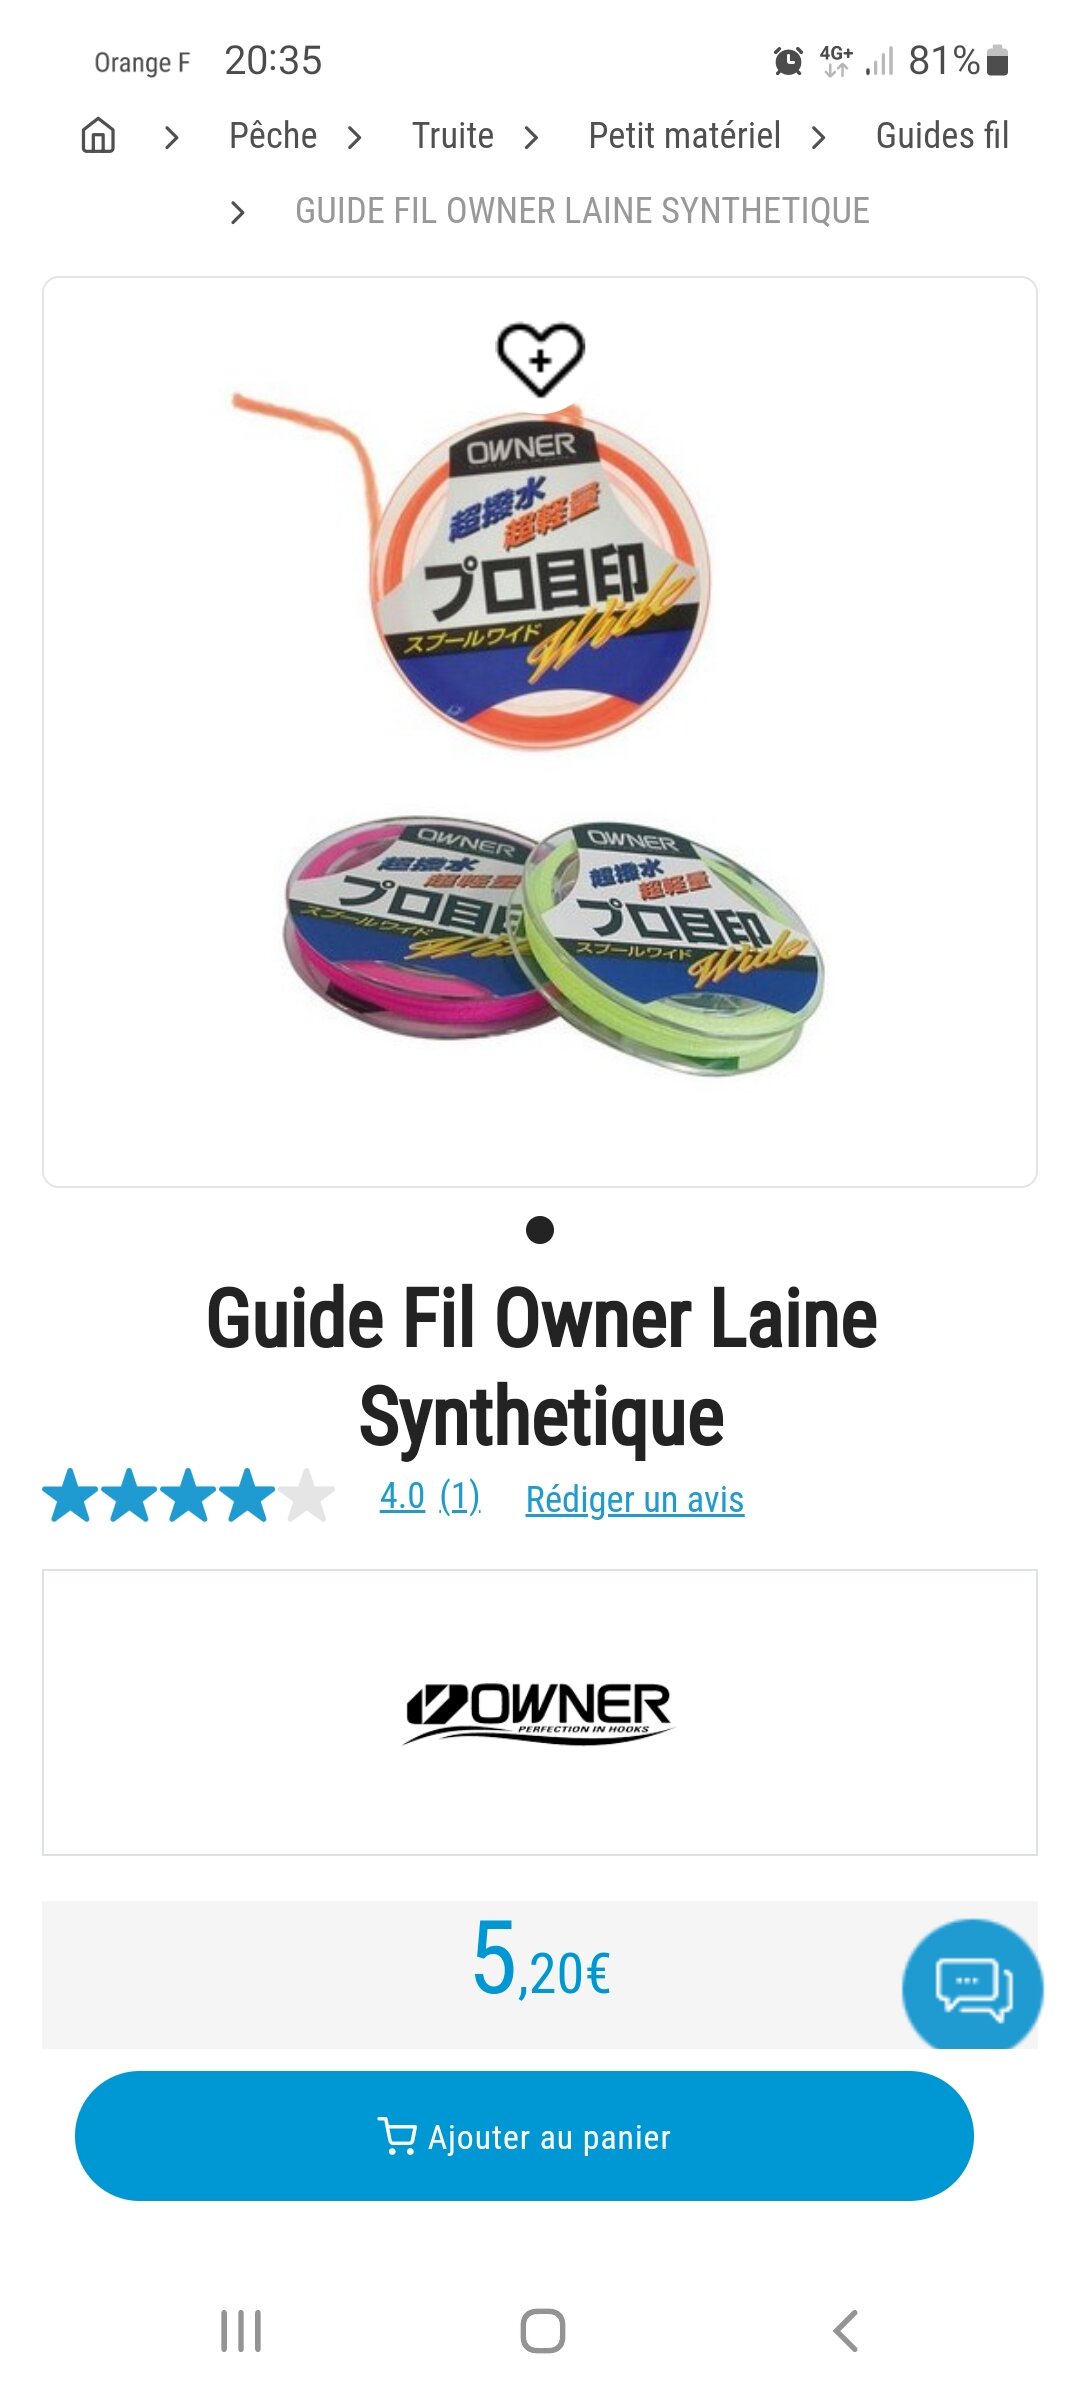 Guide fil owner laine synthetique